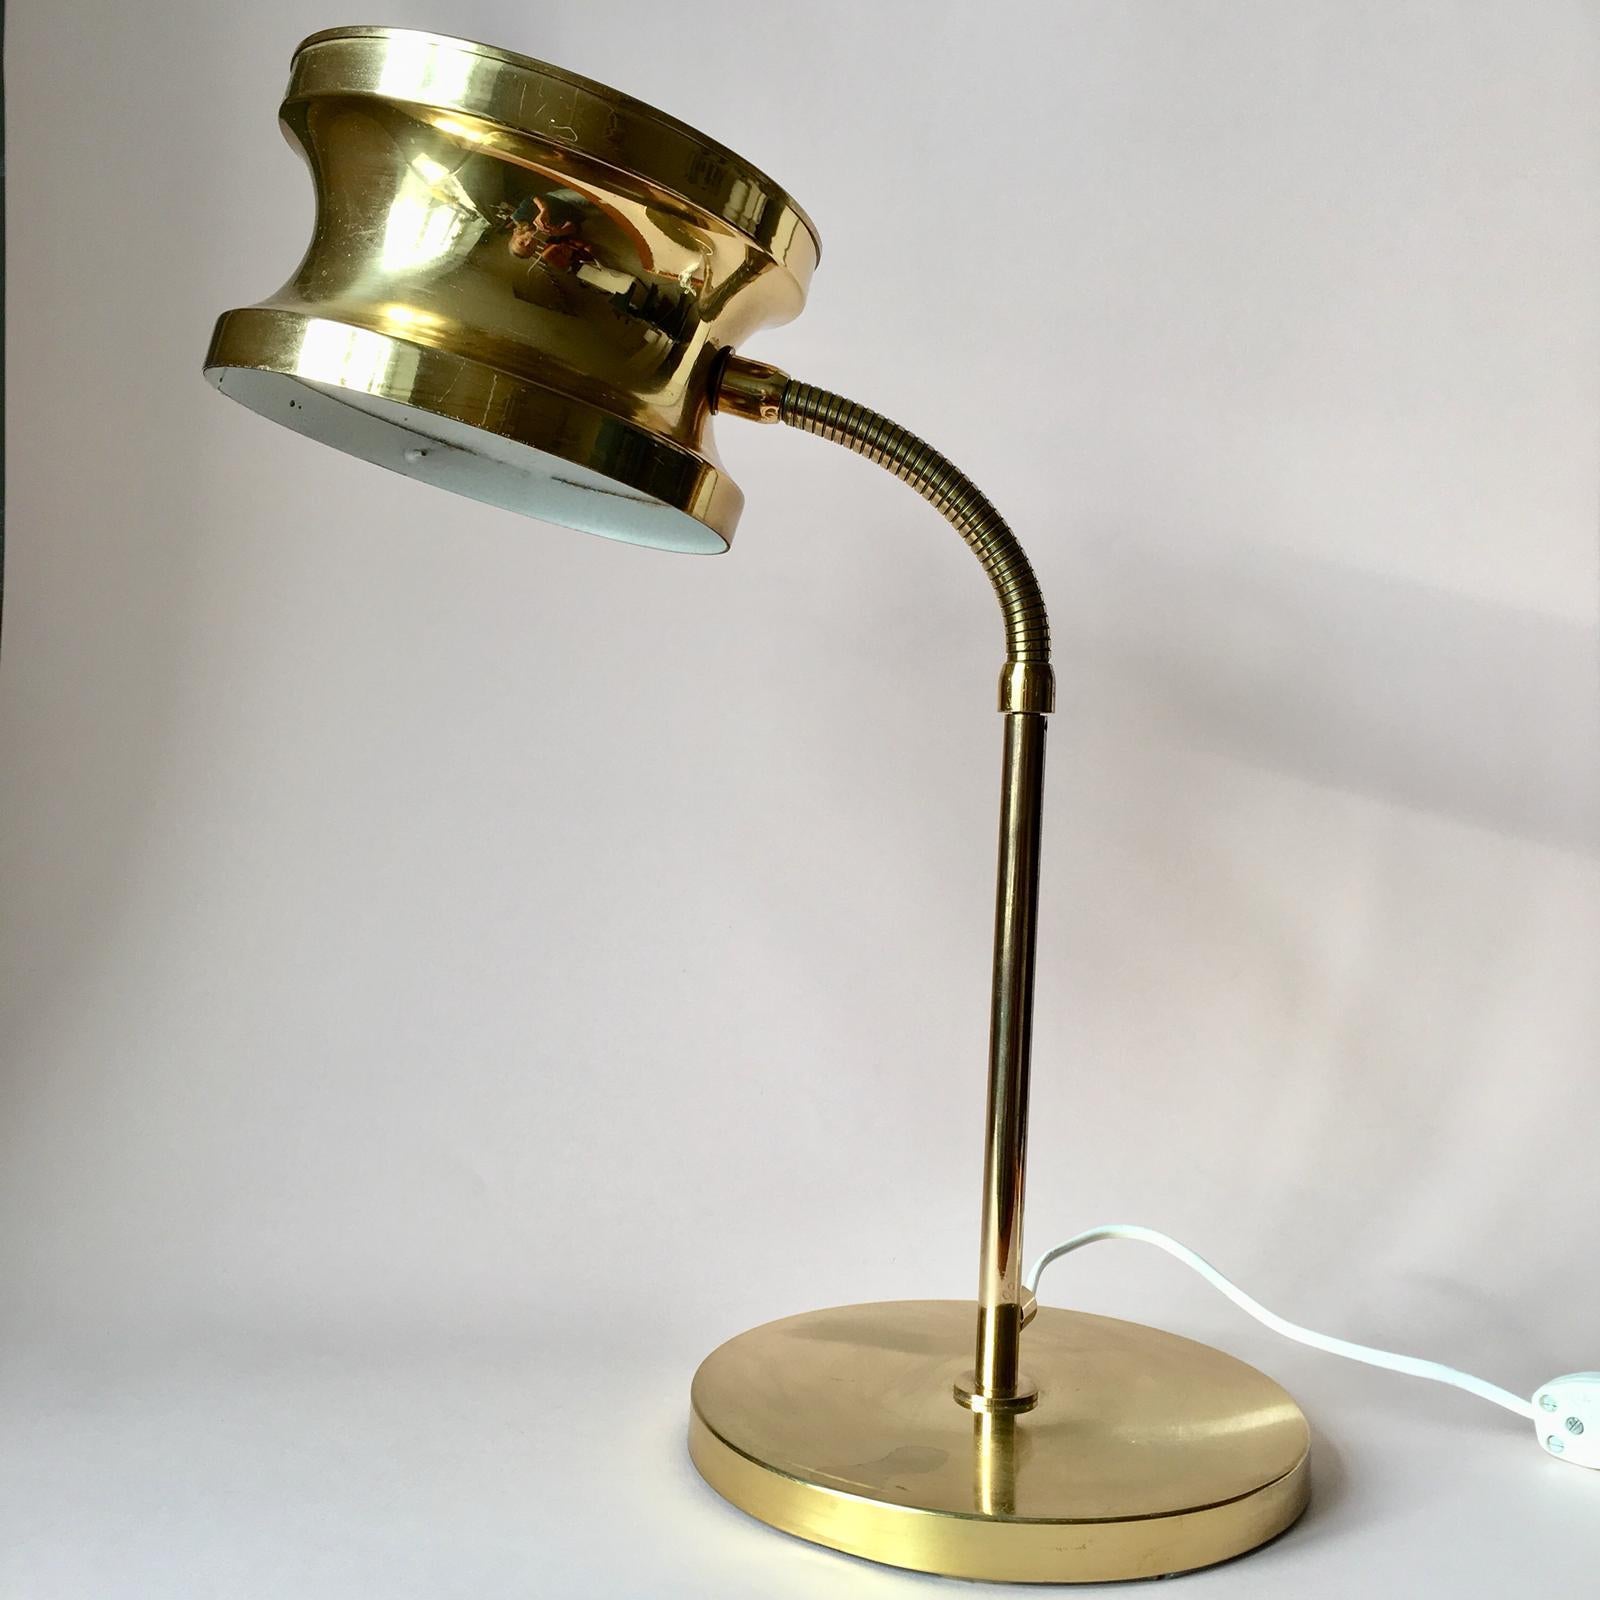 This vintage desk lamp is fully made of brass with white color inside the shade. Due to its brass bending arm you can change a light angle and its height. The brass parts are in a good vintage condition, but the white inside part features some signs